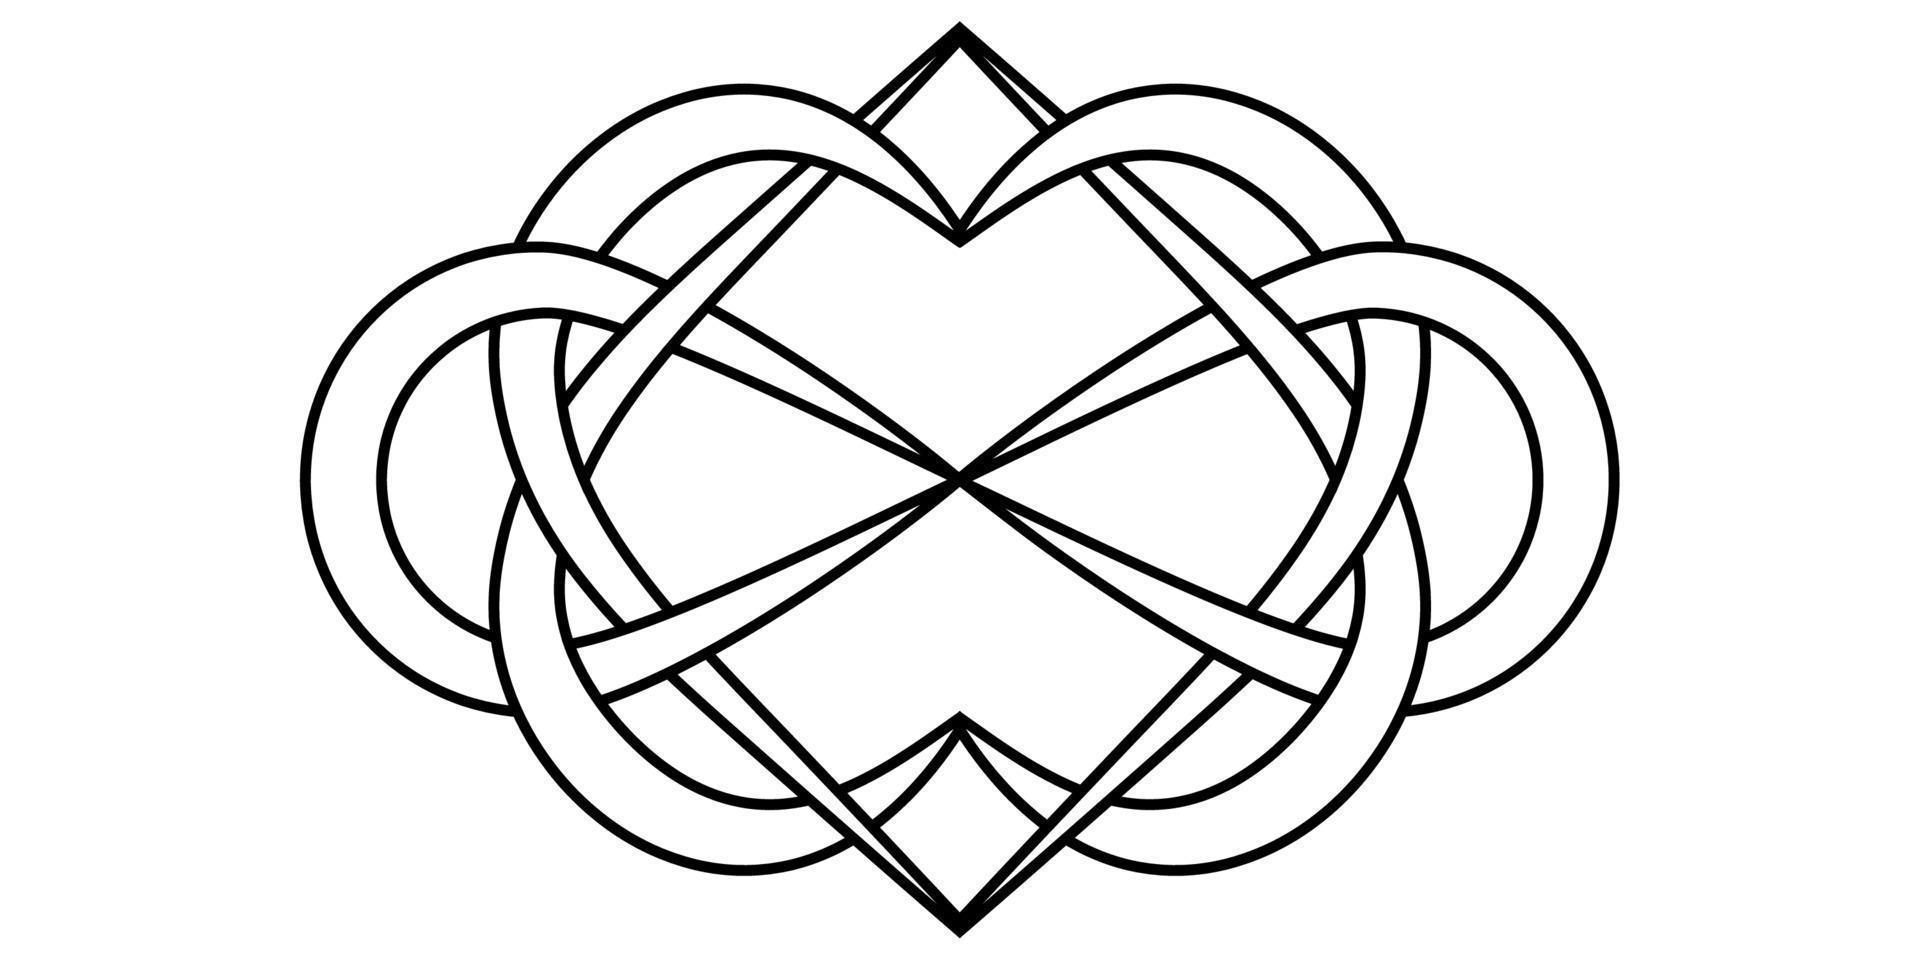 Knot of hearts and infinity sign, vector sign symbol infinite and eternal love